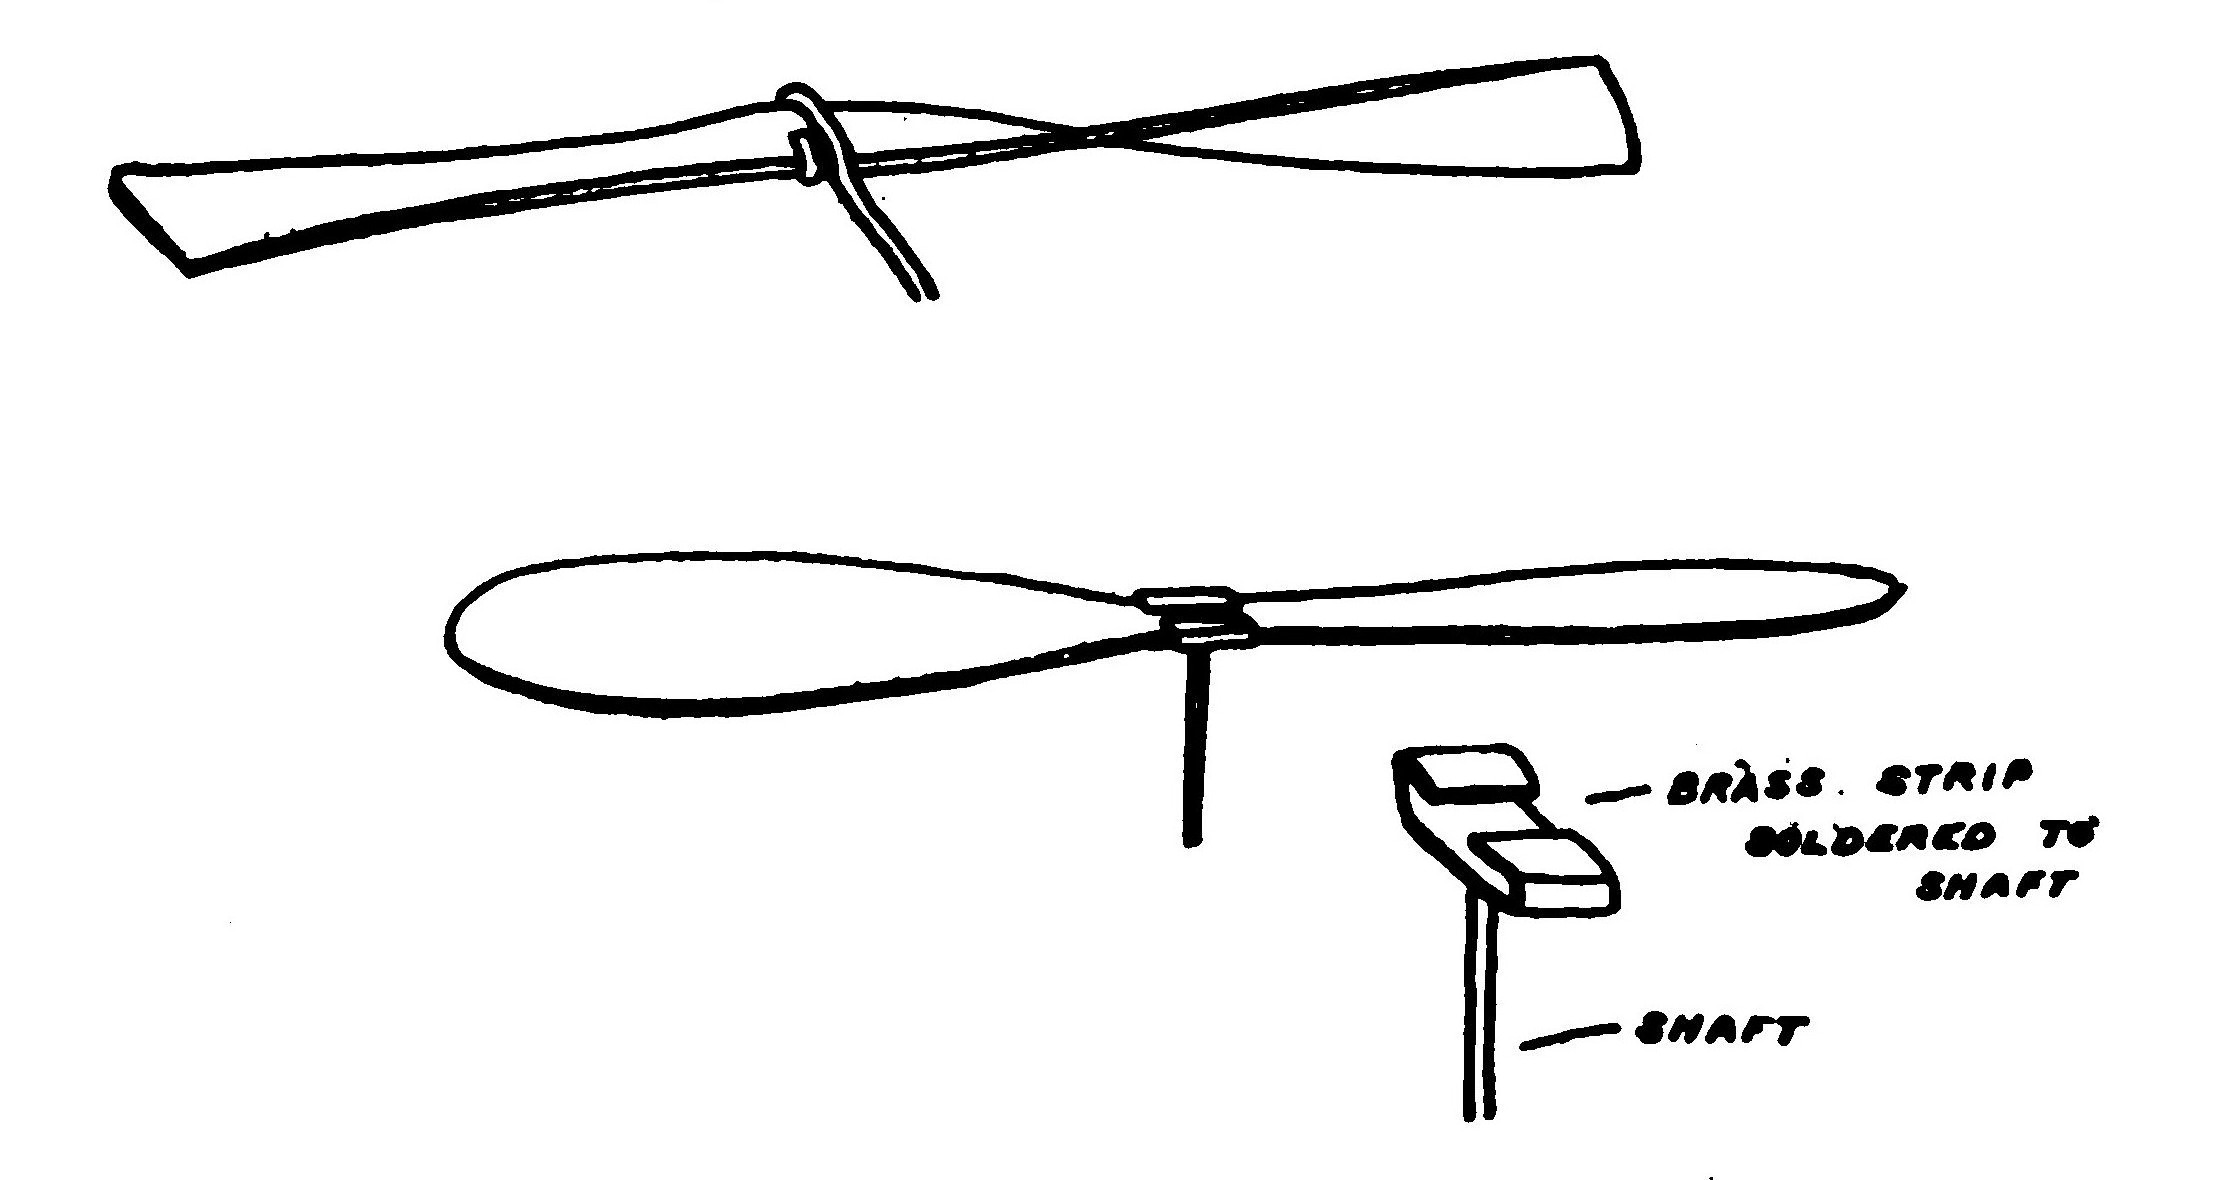 FIG. 35. Bent wood propellers and the methods of fastening them to the shaft.